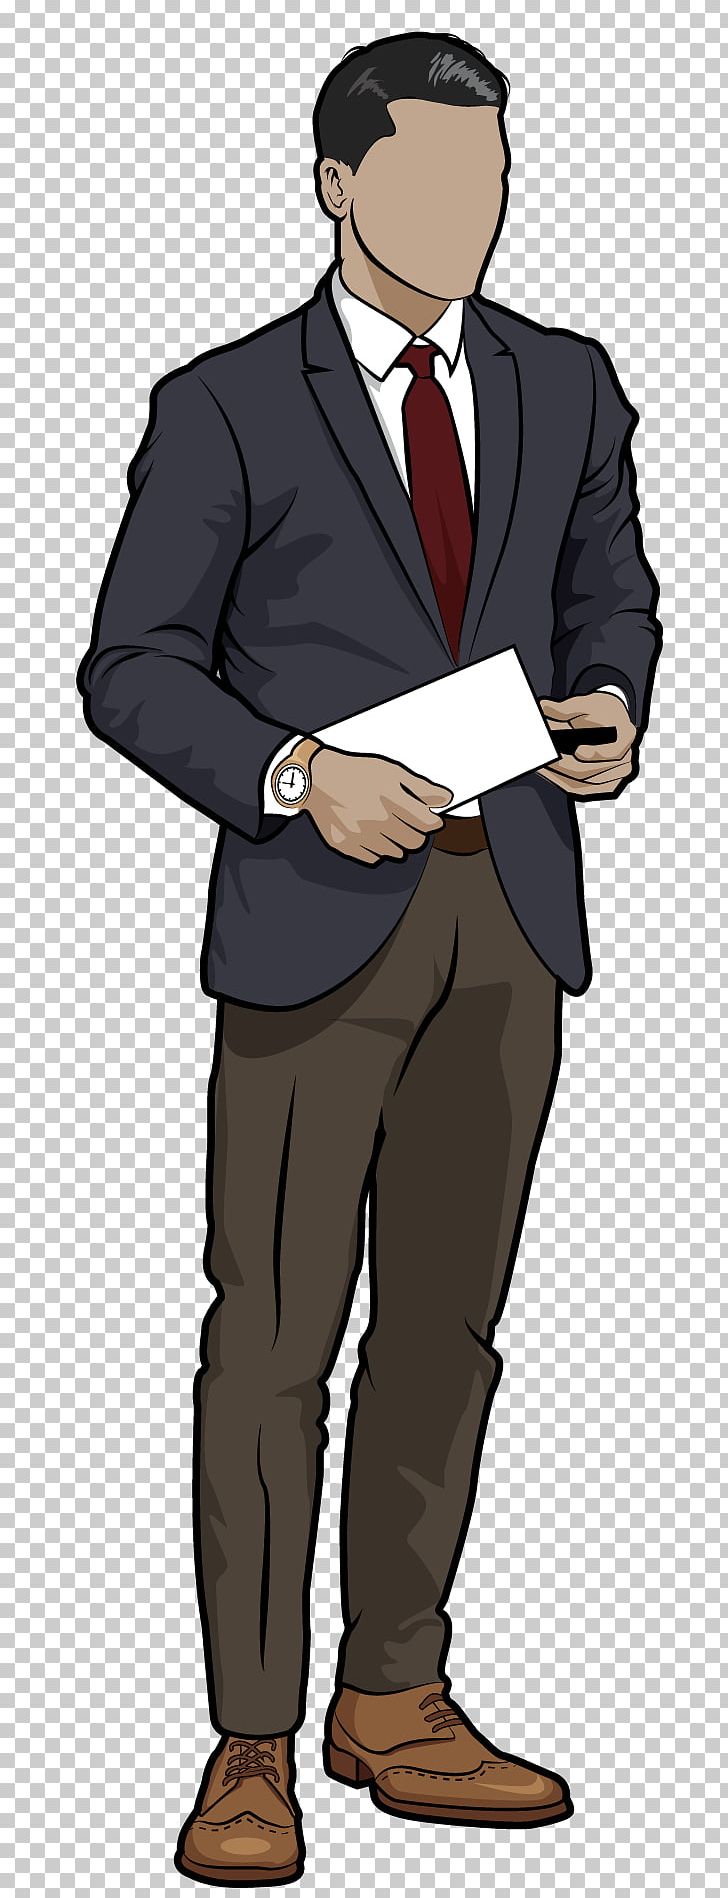 Suit STX IT20 RISK.5RV NR EO Tuxedo M. PNG, Clipart, Business, Businessperson, Cartoon, Clothing, Fictional Character Free PNG Download